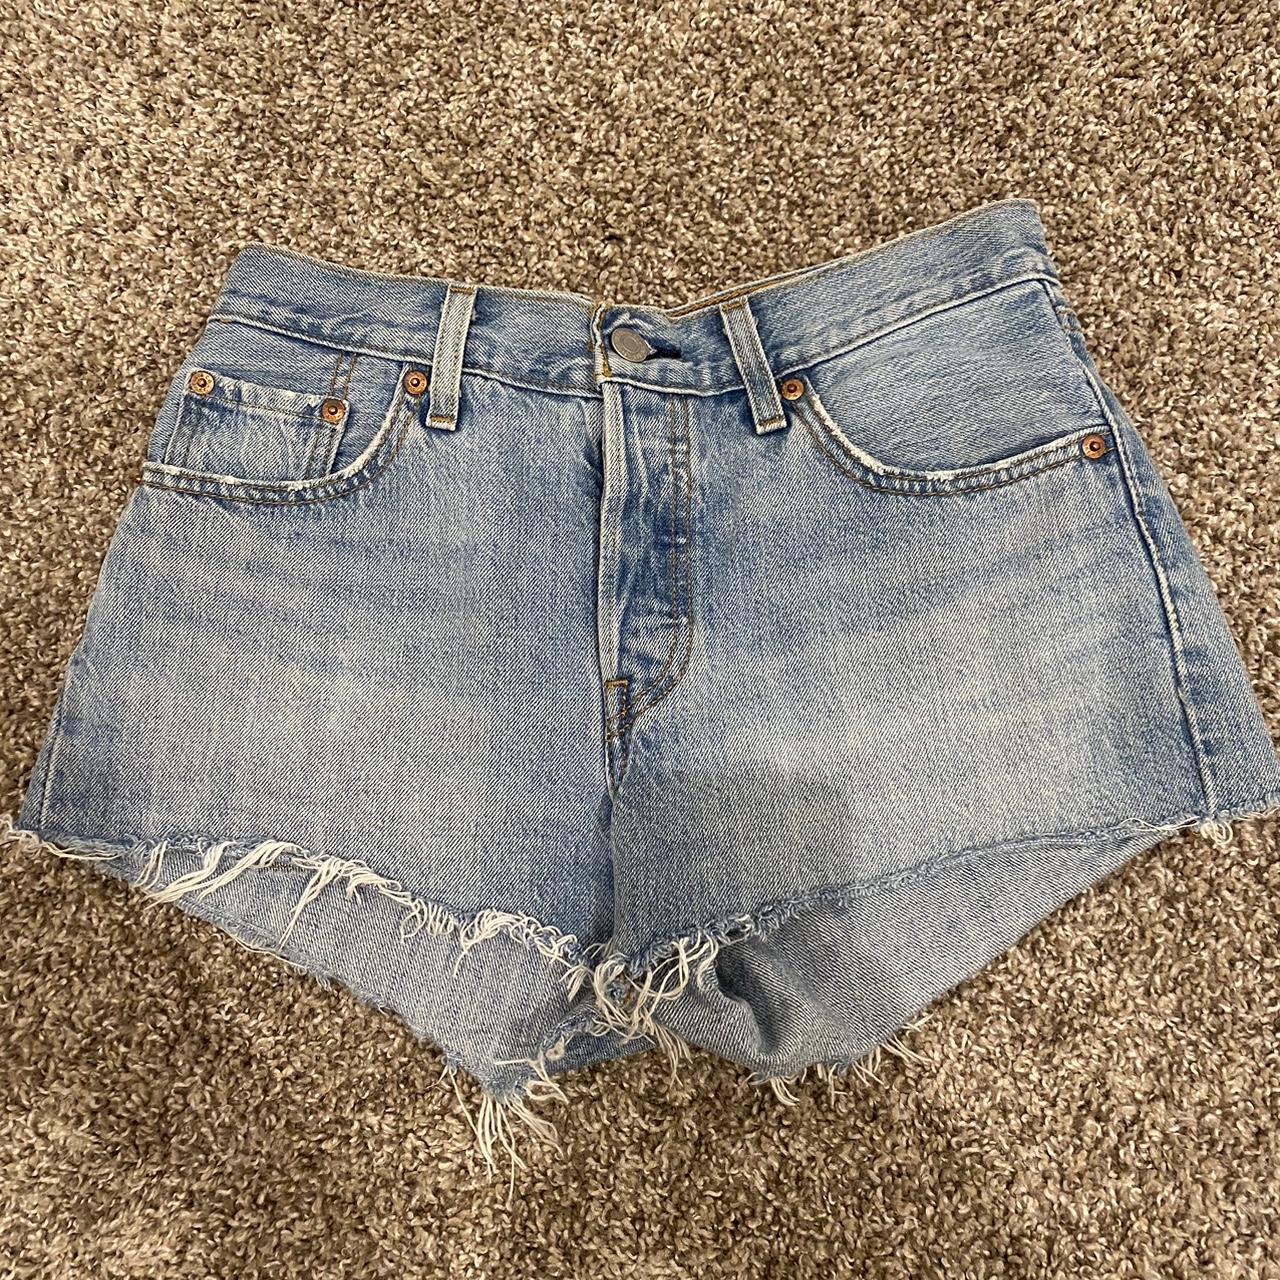 Levi’s 501 shorts in a 25!!! Great condition! Super... - Depop